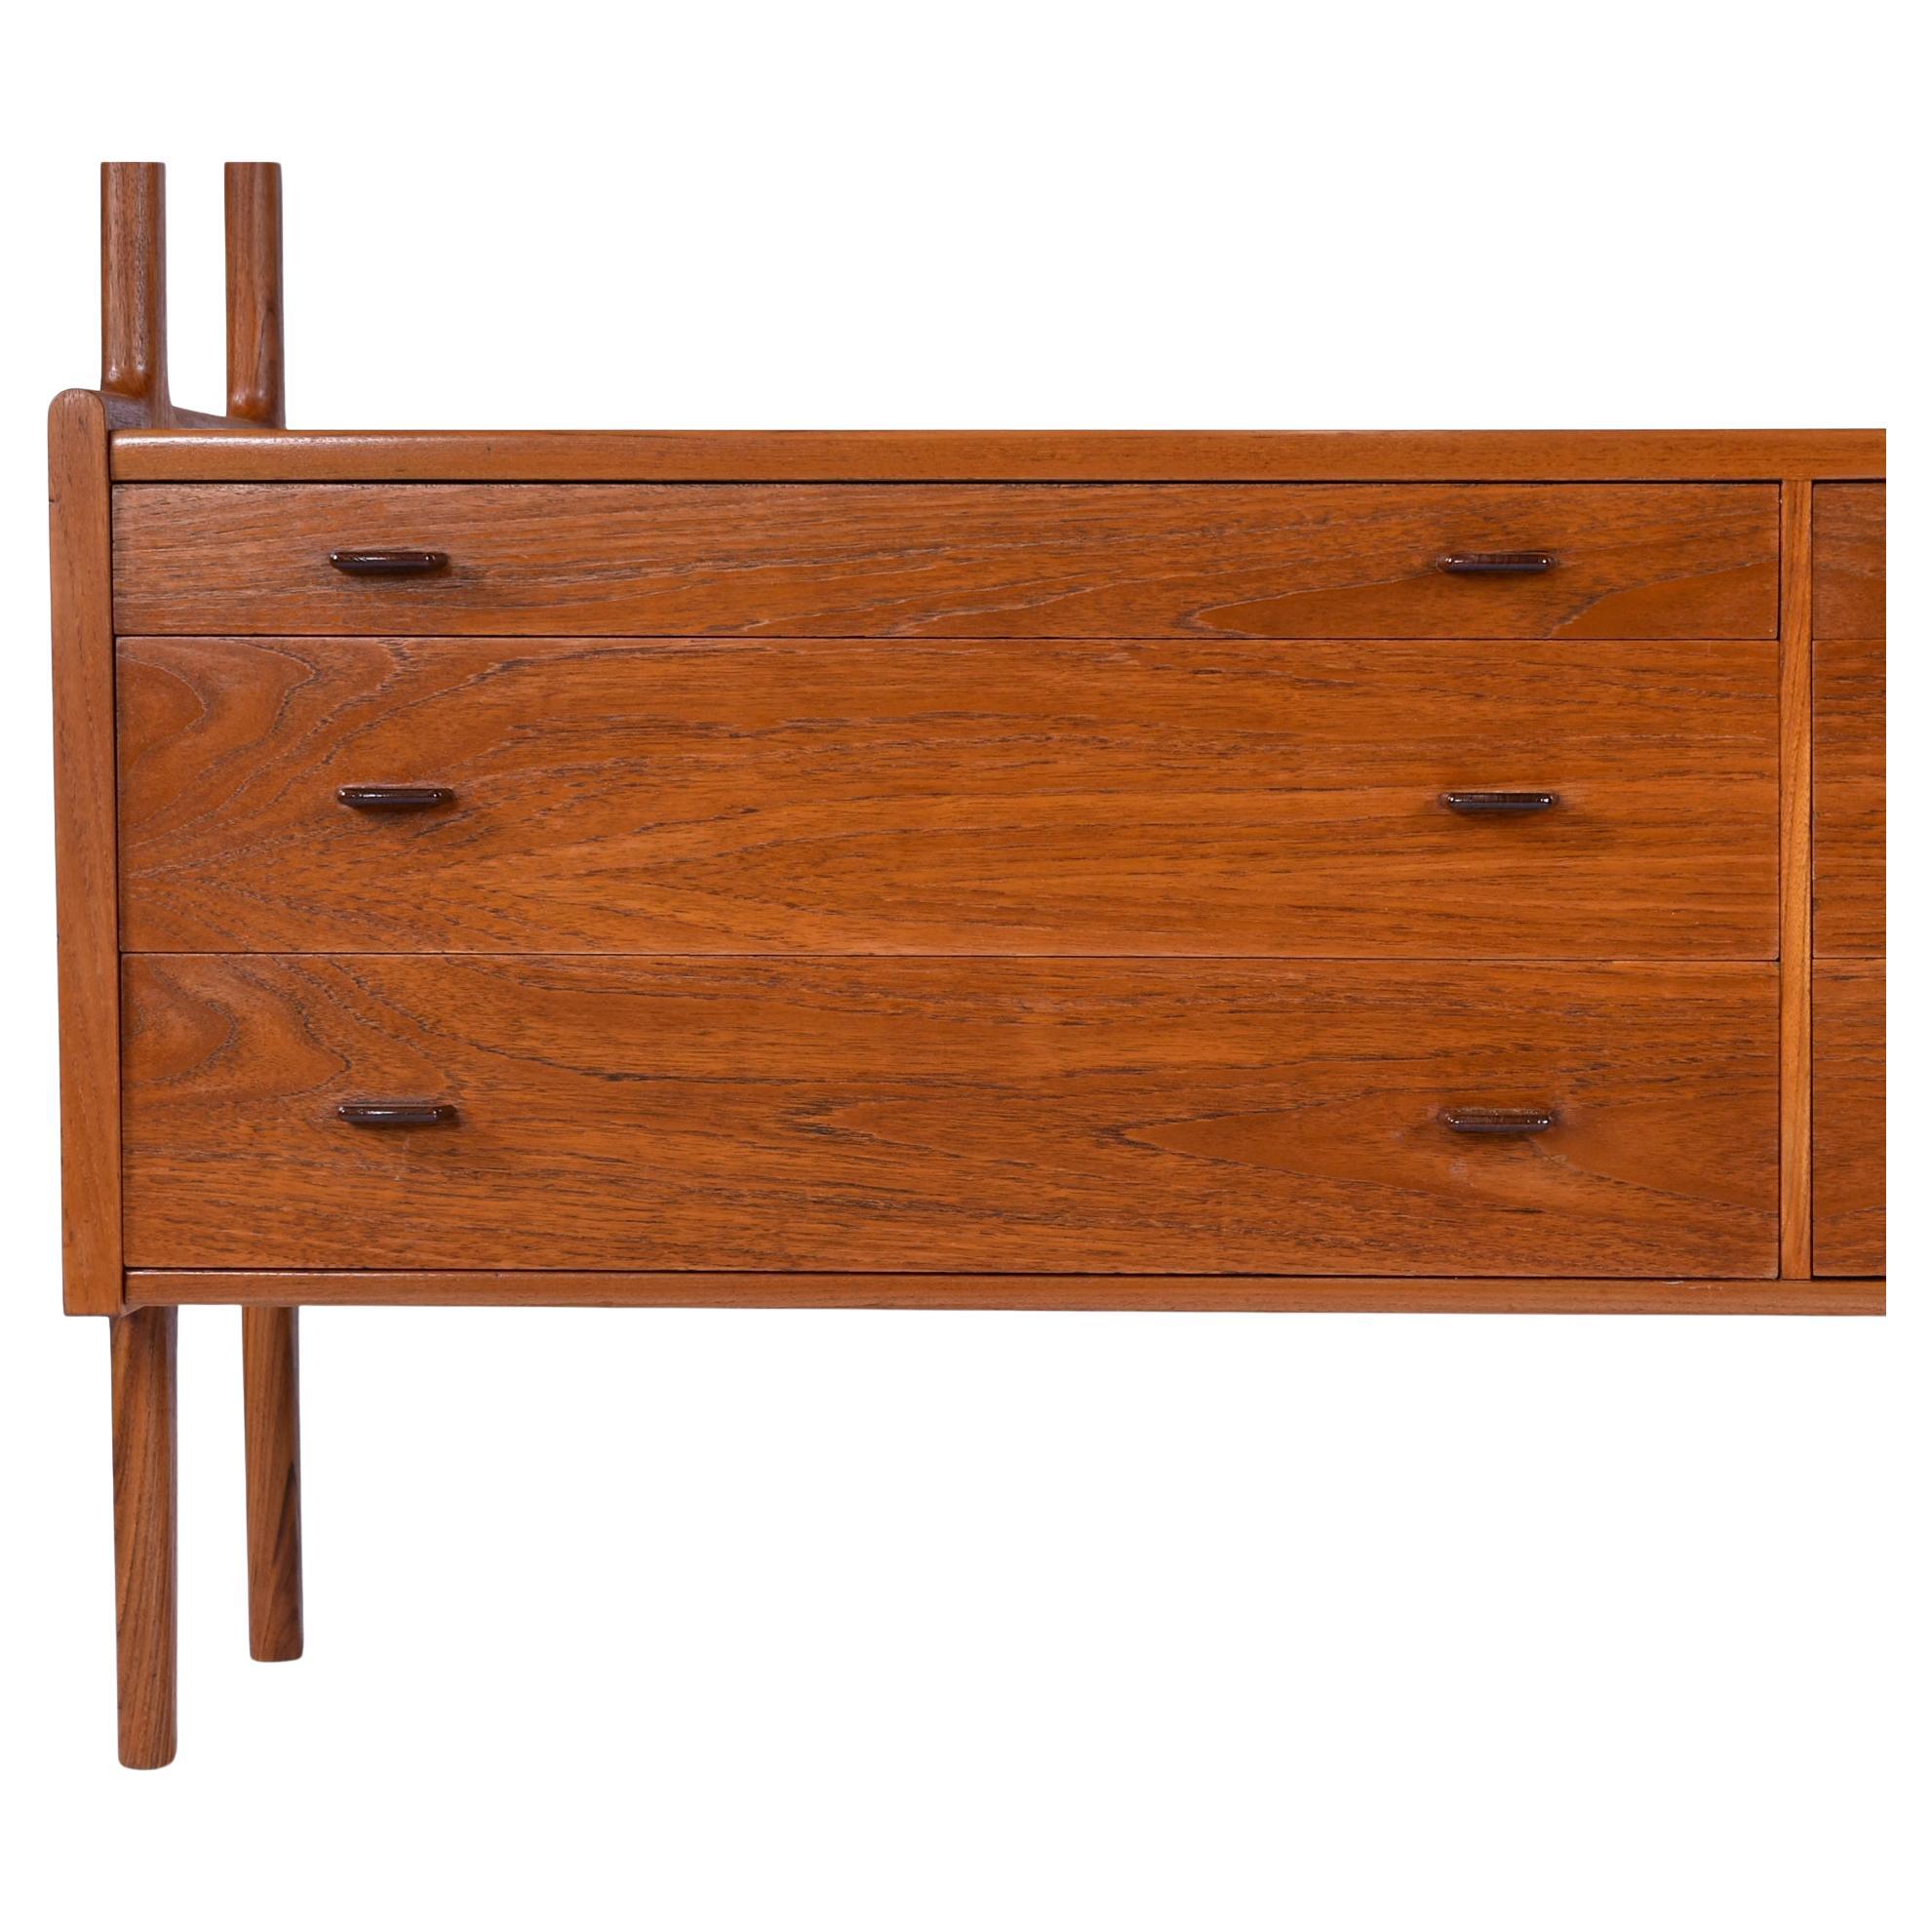 1958 Danish Teak Hutch Bar Credenza by Hans Wegner for Ry Møbler In Good Condition For Sale In Chattanooga, TN